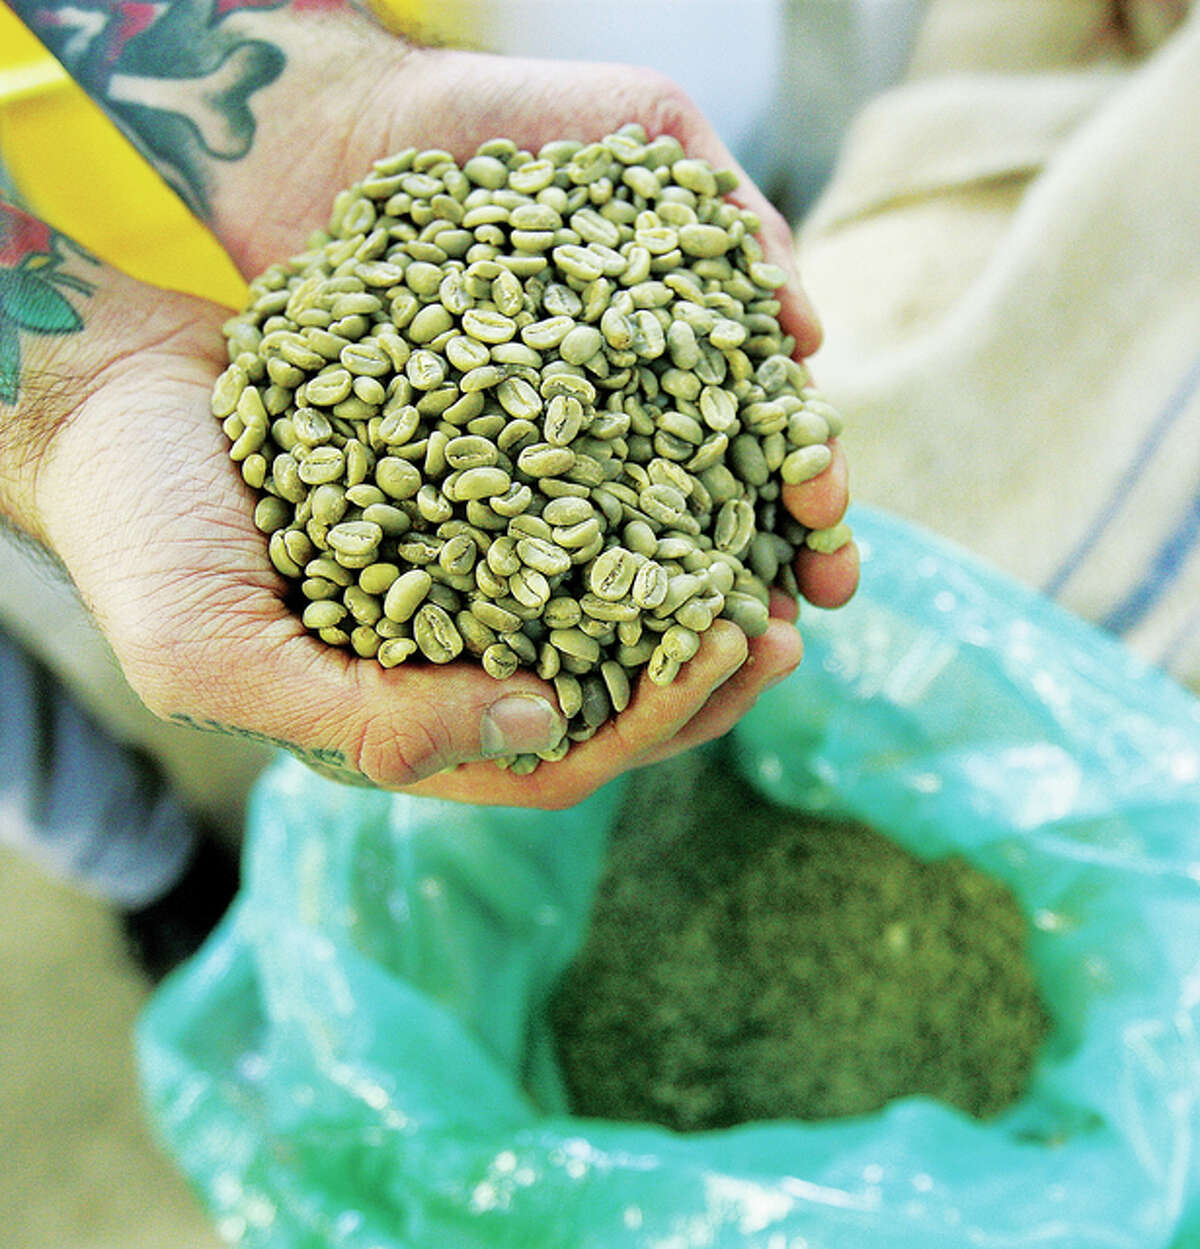 Keppel holds a handful of fresh coffee beans which before roasting are a shade of green. The roasting process, which takes around 15 minutes, enlarges the beans and gives them the brown color consumers are used to seeing. Goshen Coffee uses beans from various countries in the “coffee belt” where growing conditions are ideal like Columbia, Costa Roca, Mexico and Guatemala just to name a few.